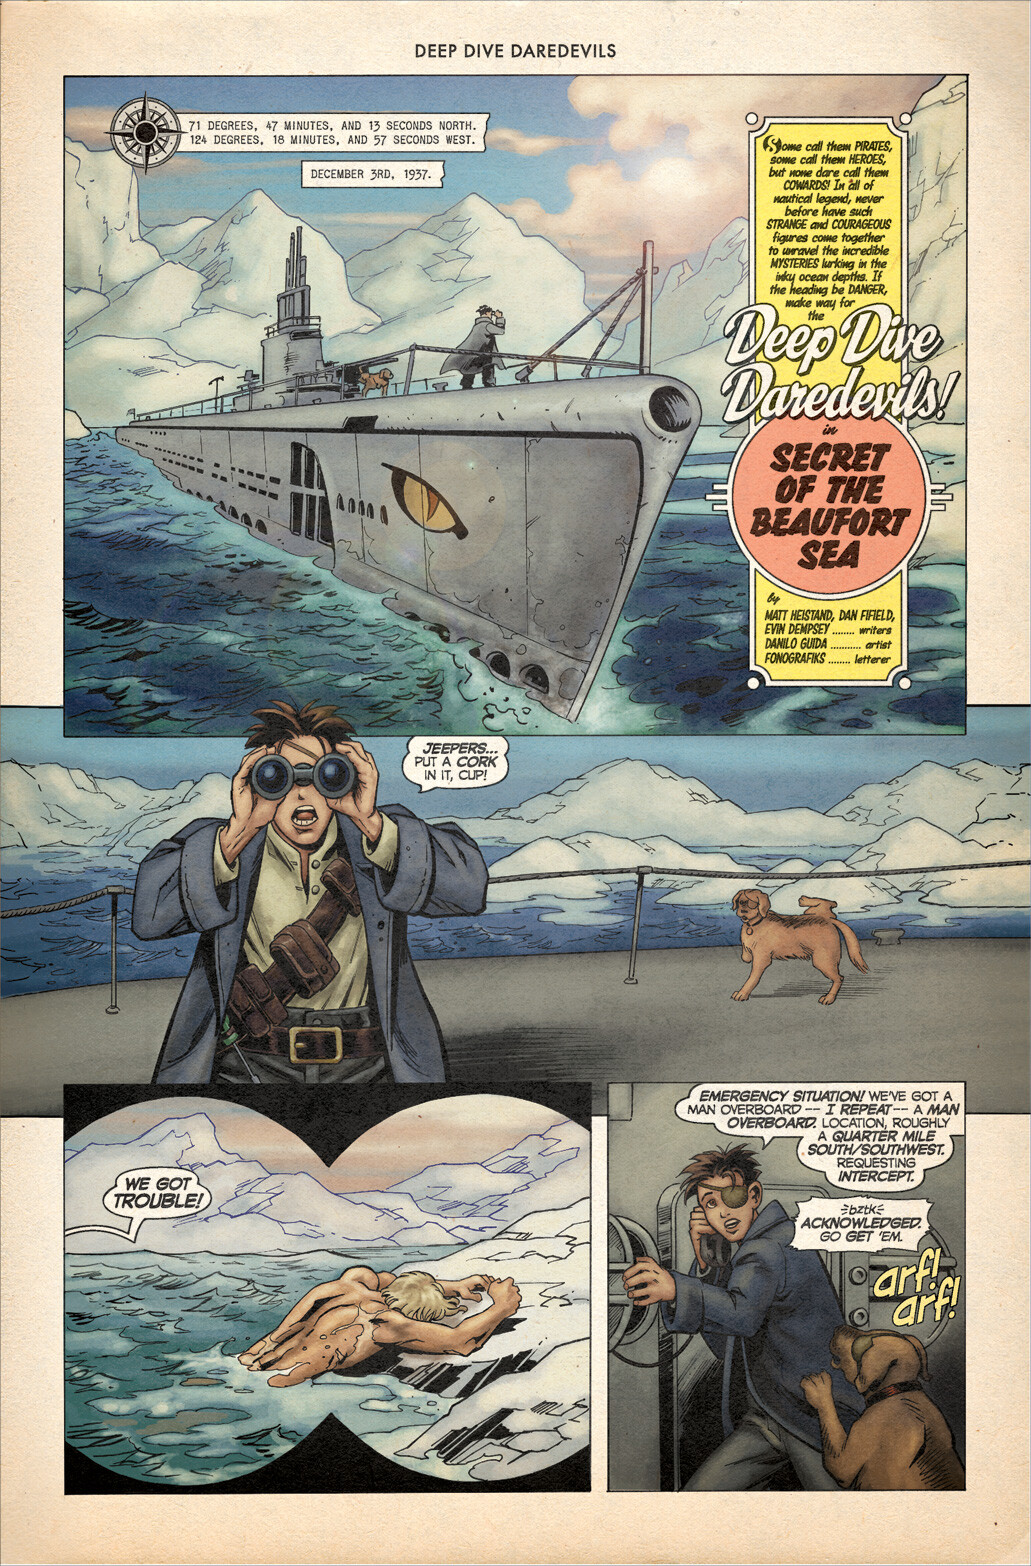 Deep Dive Daredevils, The Secret of the Beaufort Sea.
Page 2